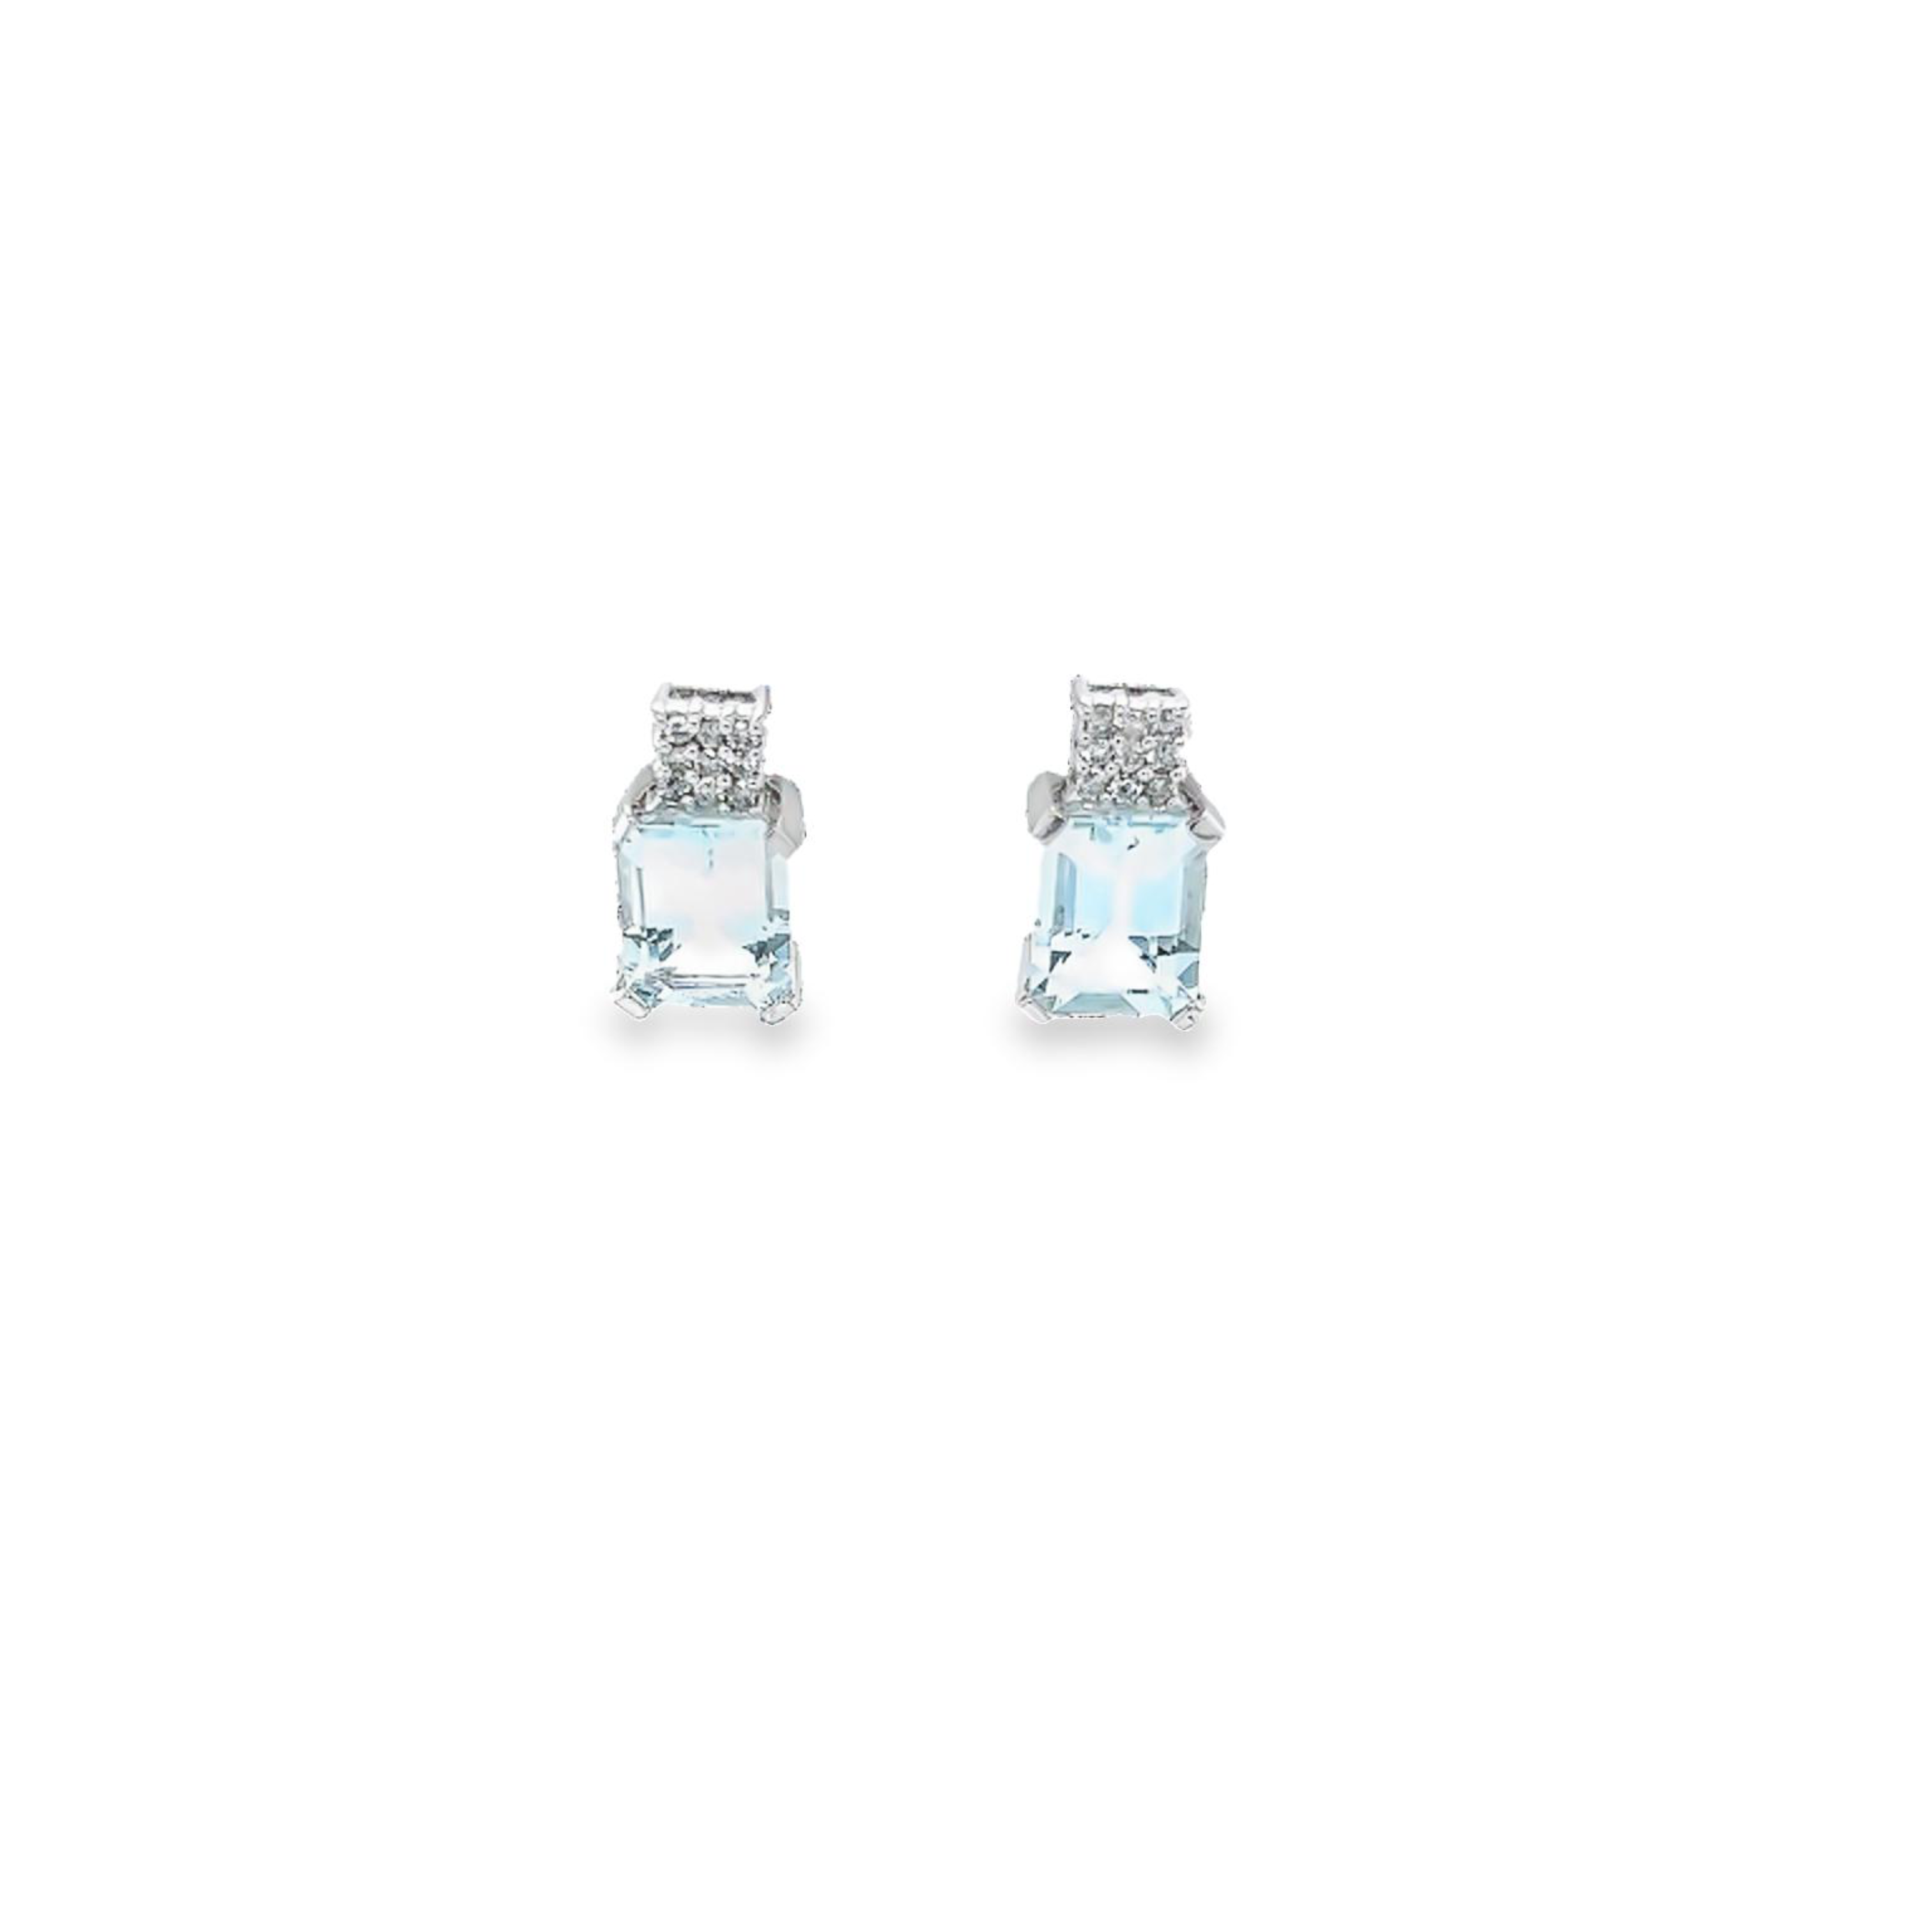 14 Karat white gold stud earrings with 2=4.60 total weight emerald cut Aquamarines and 18=0.18 total weight round brilliant G SI Diamonds